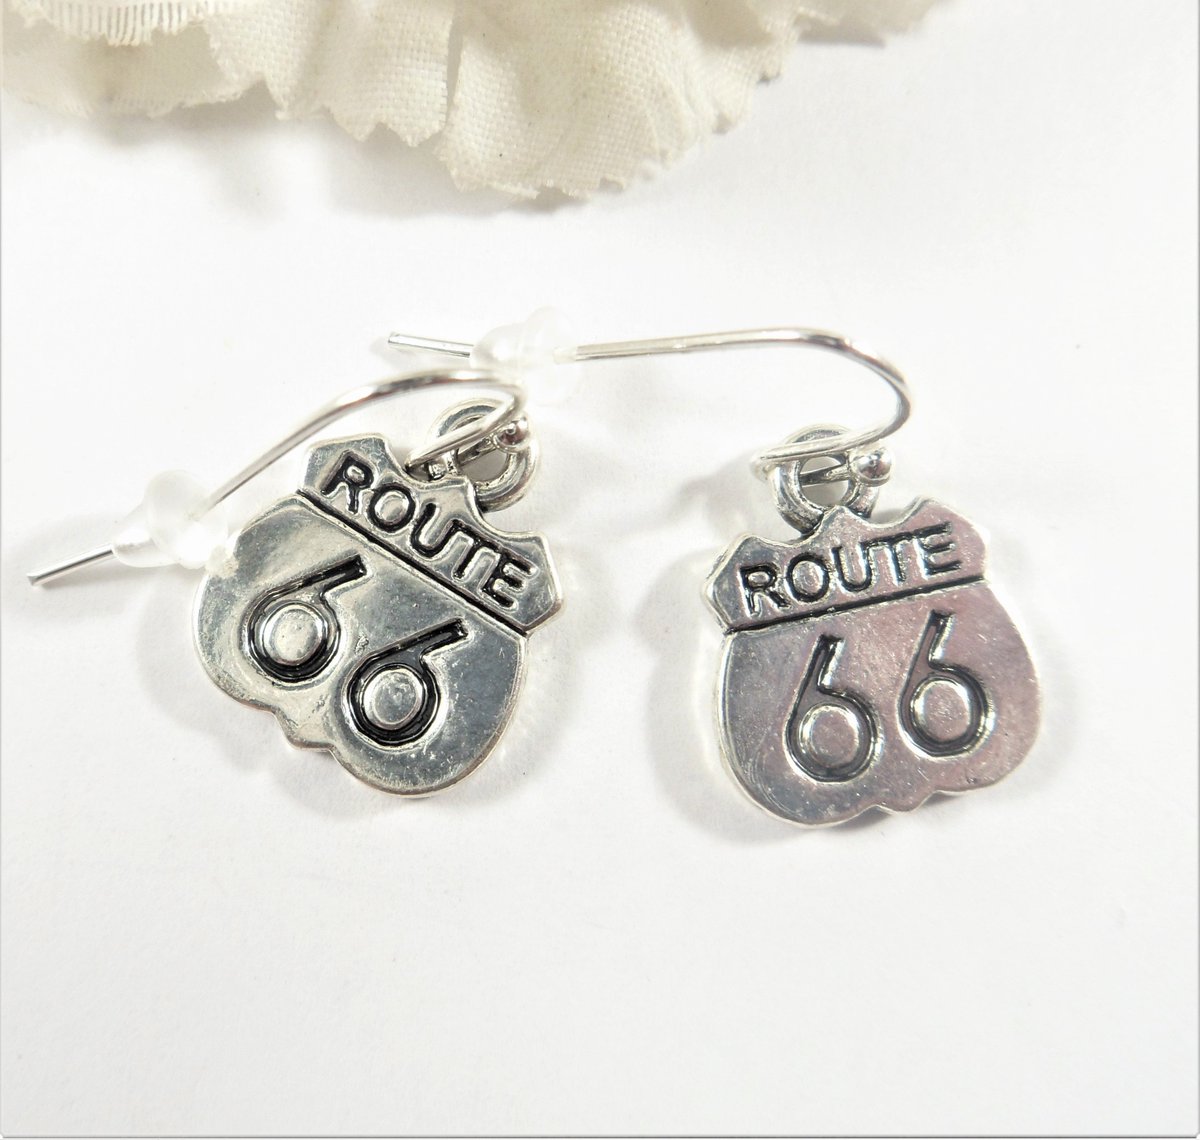 Route 66 Earrings, Route 66 Jewelry, New Mexico Earrings, New Mexico Jewelry, NM Earrings, Route 66 Sign Earrings, America's Highway tuppu.net/b13640f6 #EtsySeller #EtsyShop #SantaFe #NewMexico #Route66Charm